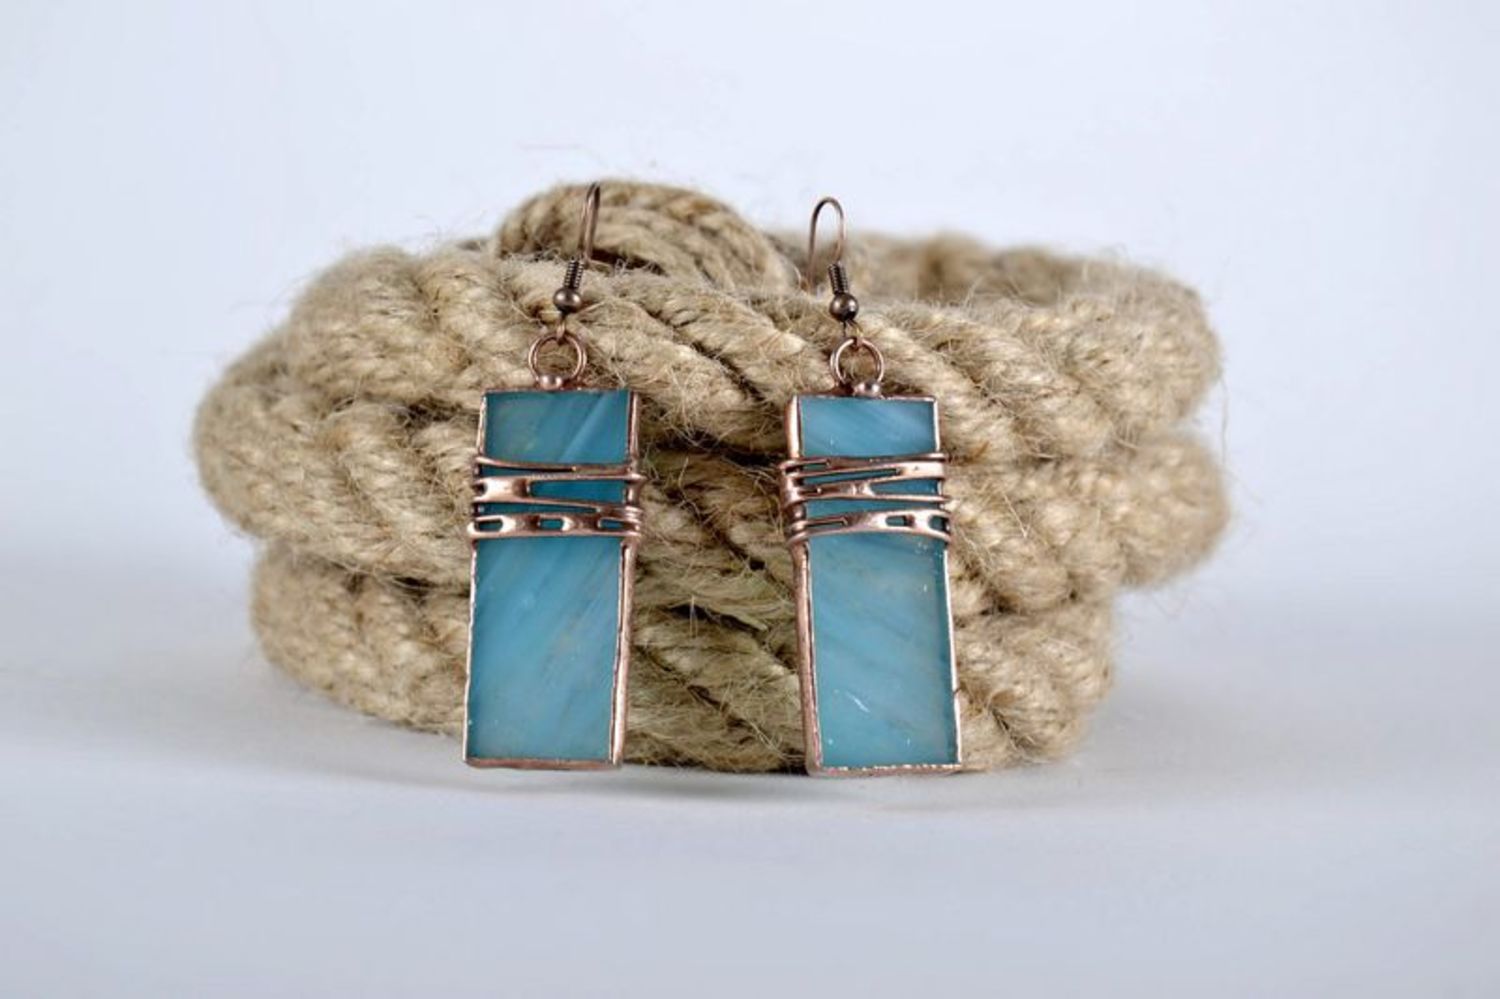 Stained glass long earrings made of copper and glass photo 3